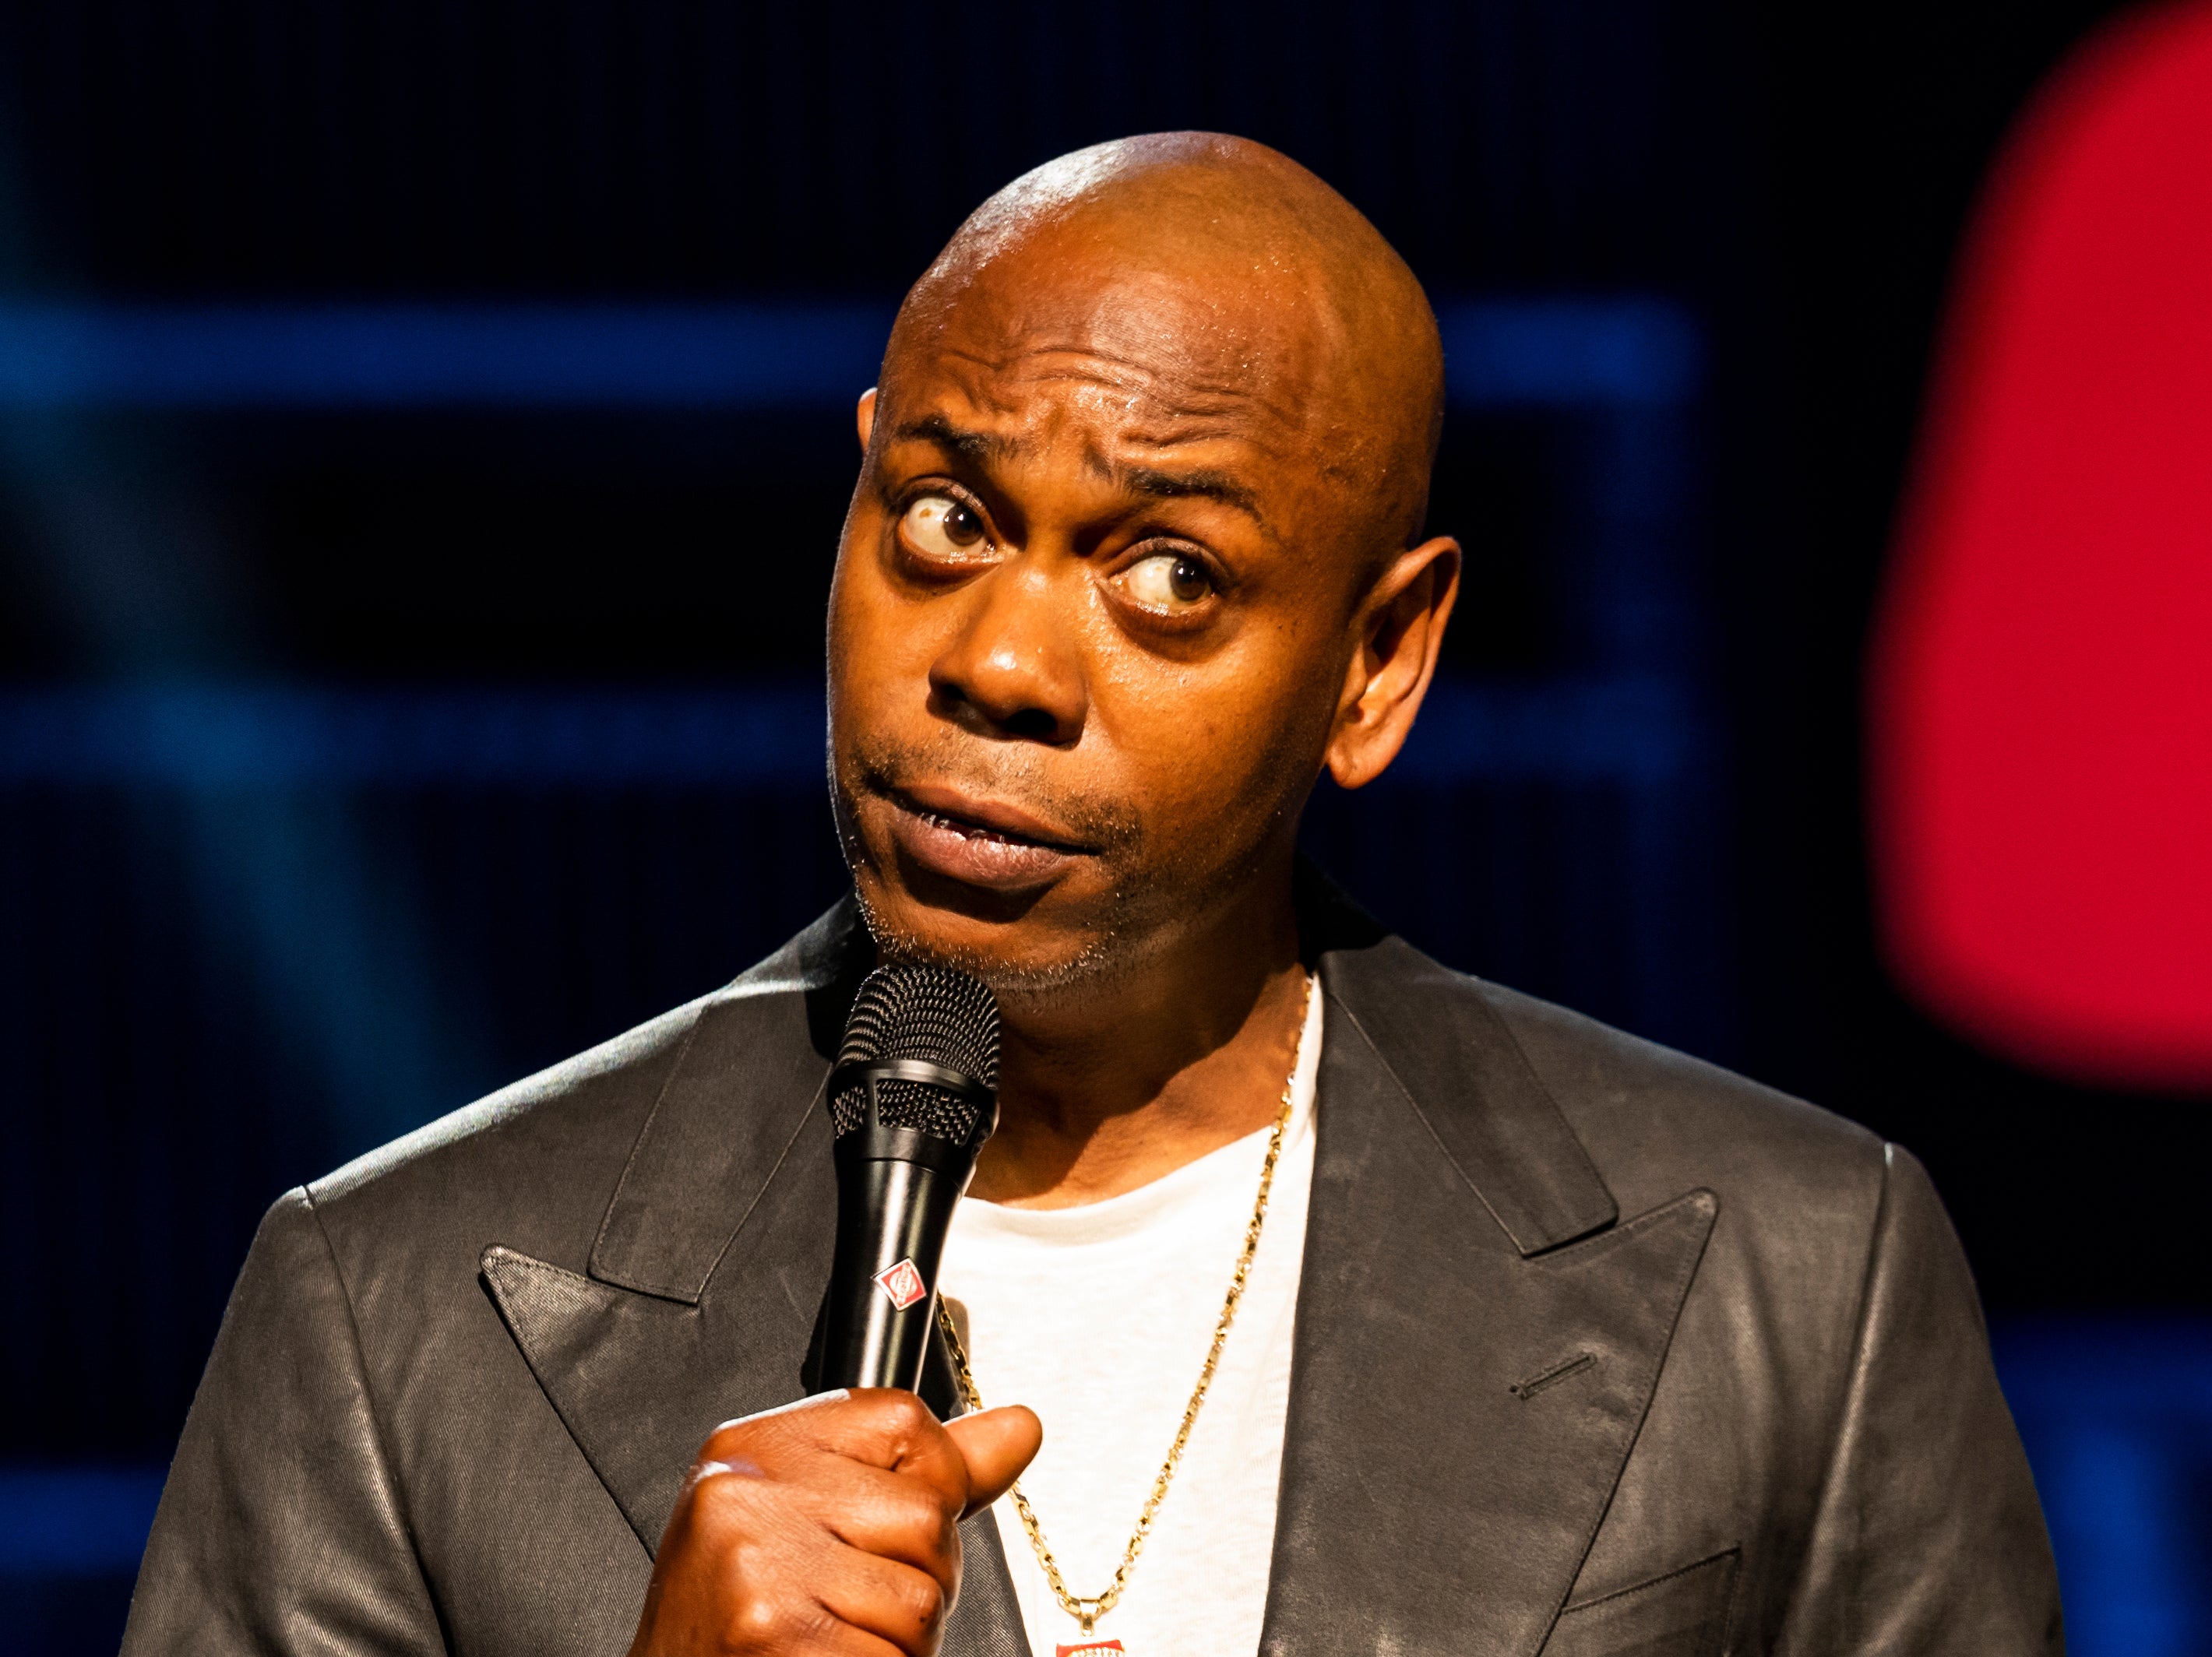 Meet the new Dave Chappelle